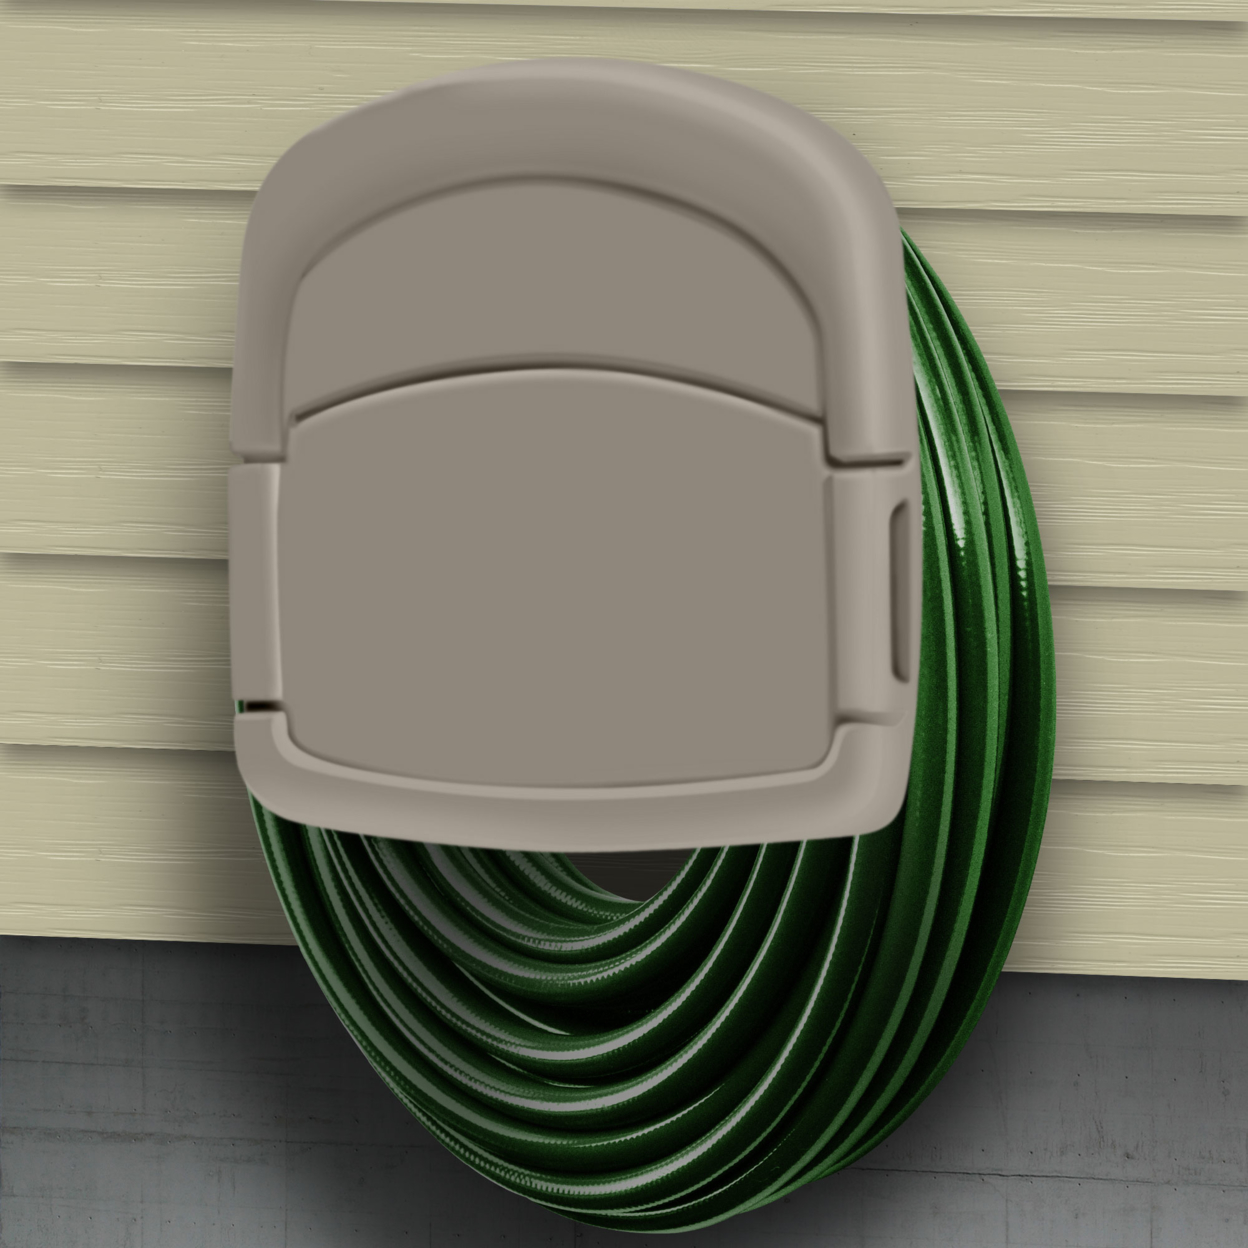 Sto-Away Wall Mounted Garden Hose Storage Caddy - 150-Foot Capacity for Standard 5/8" Outdoor